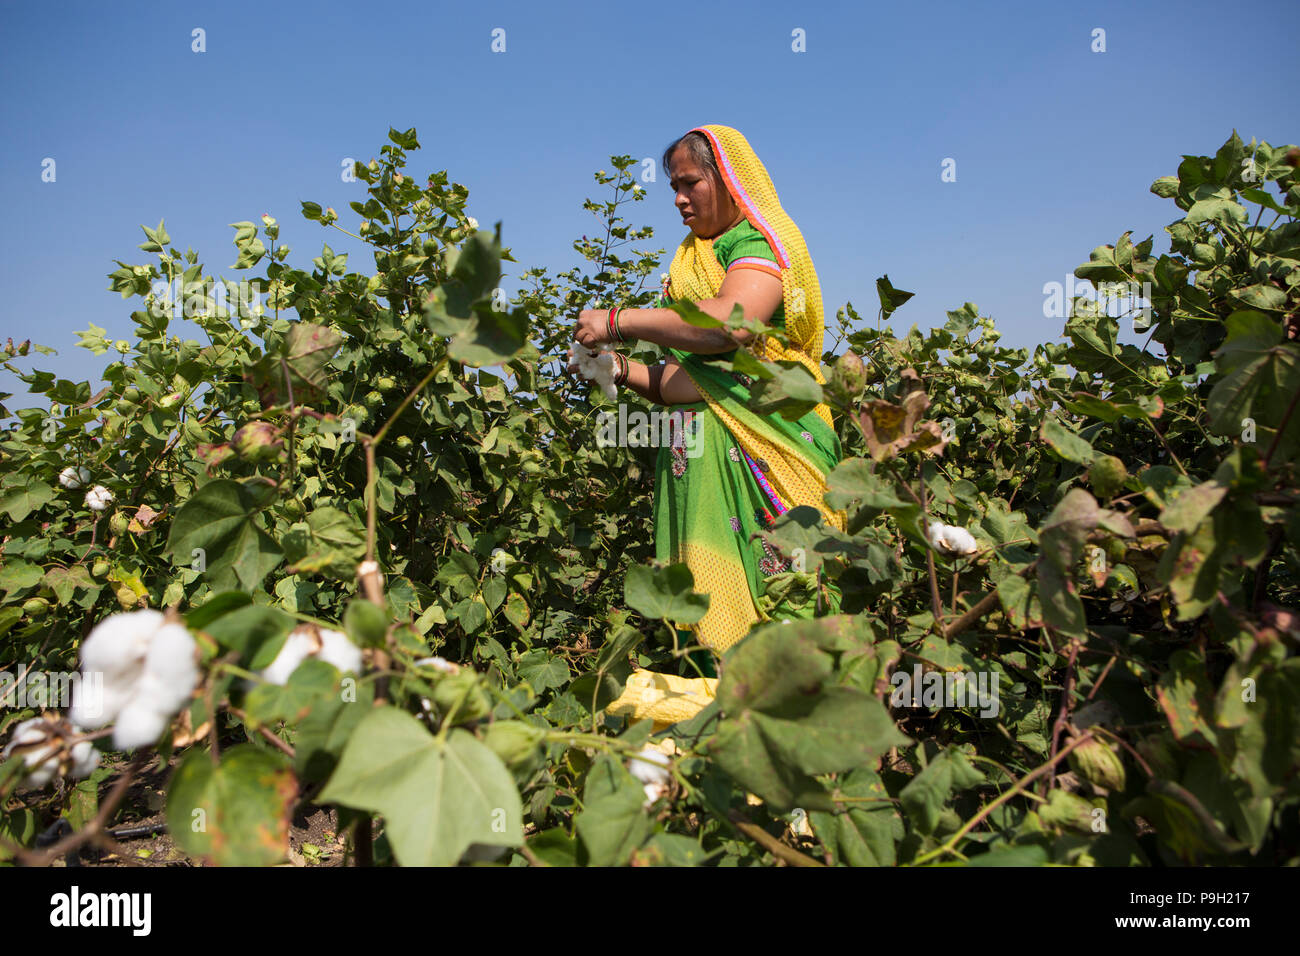 A woman harvesting cotton on their farm in Ahmedabad, India. Stock Photo